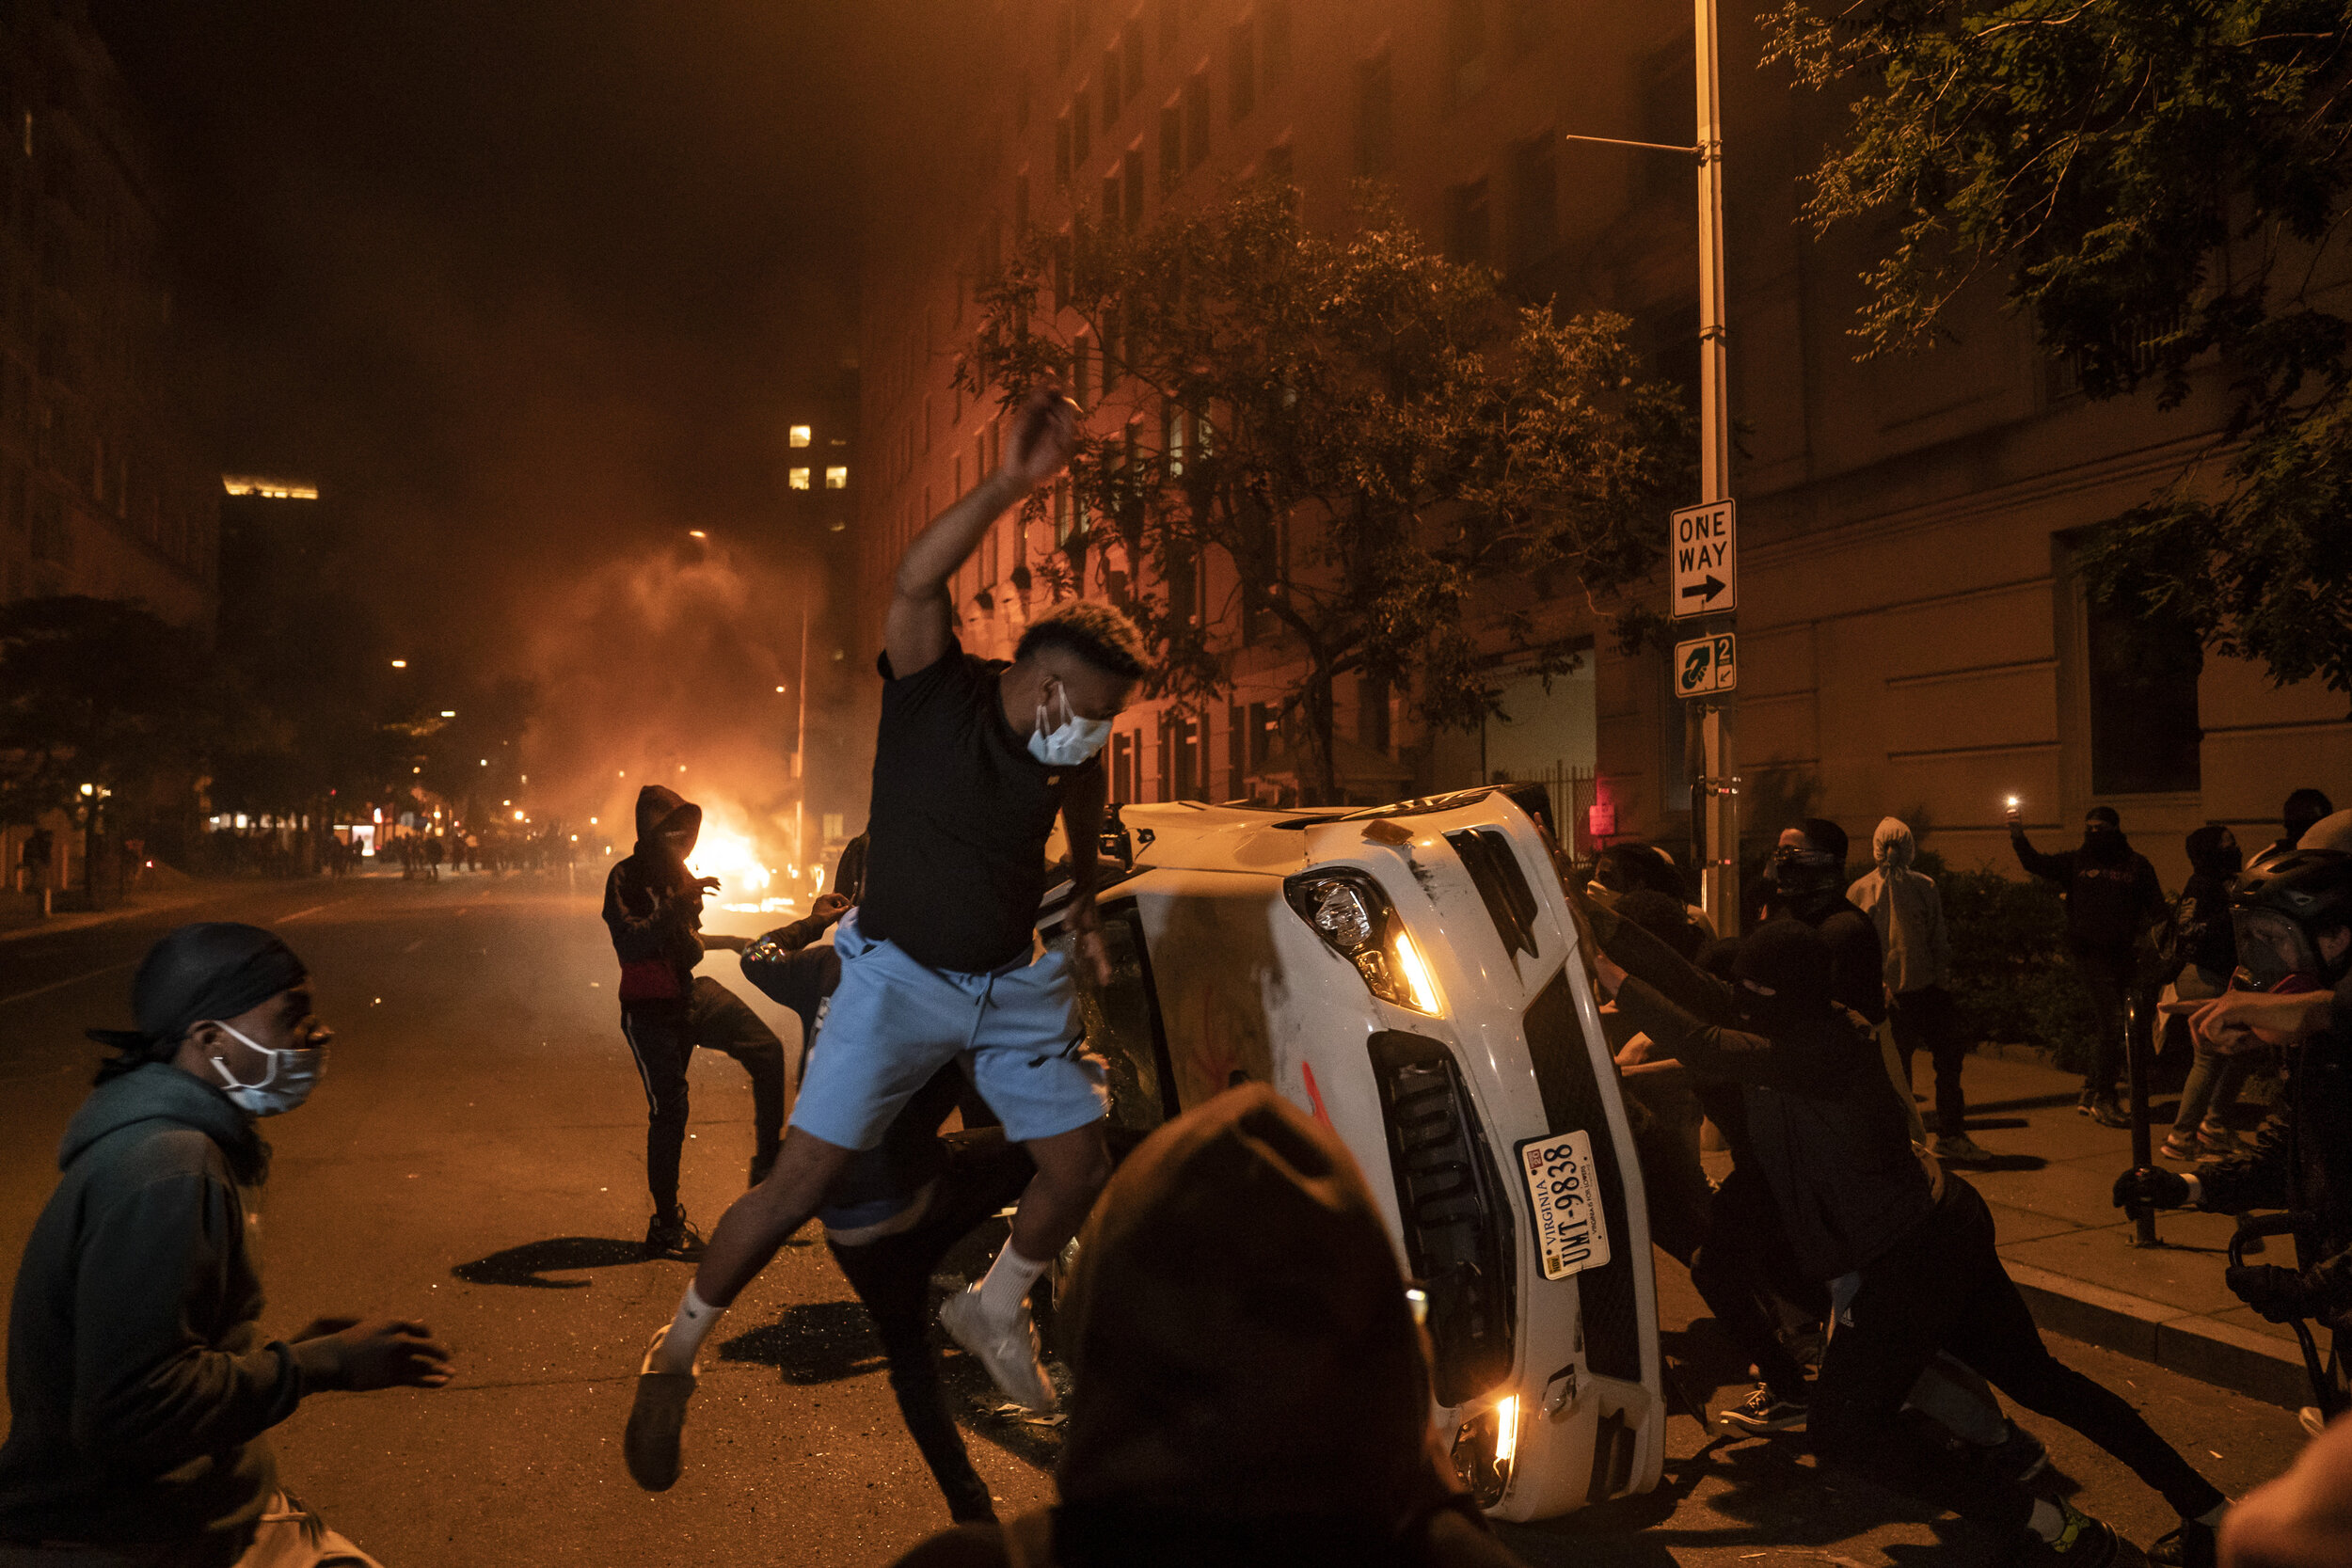  Demonstrators vandalize a car as they protest the death of George Floyd, May 31, 2020, near the White House in Washington, D.C. Floyd died after being restrained by Minneapolis police officers. (AP Photo/Evan Vucci) 